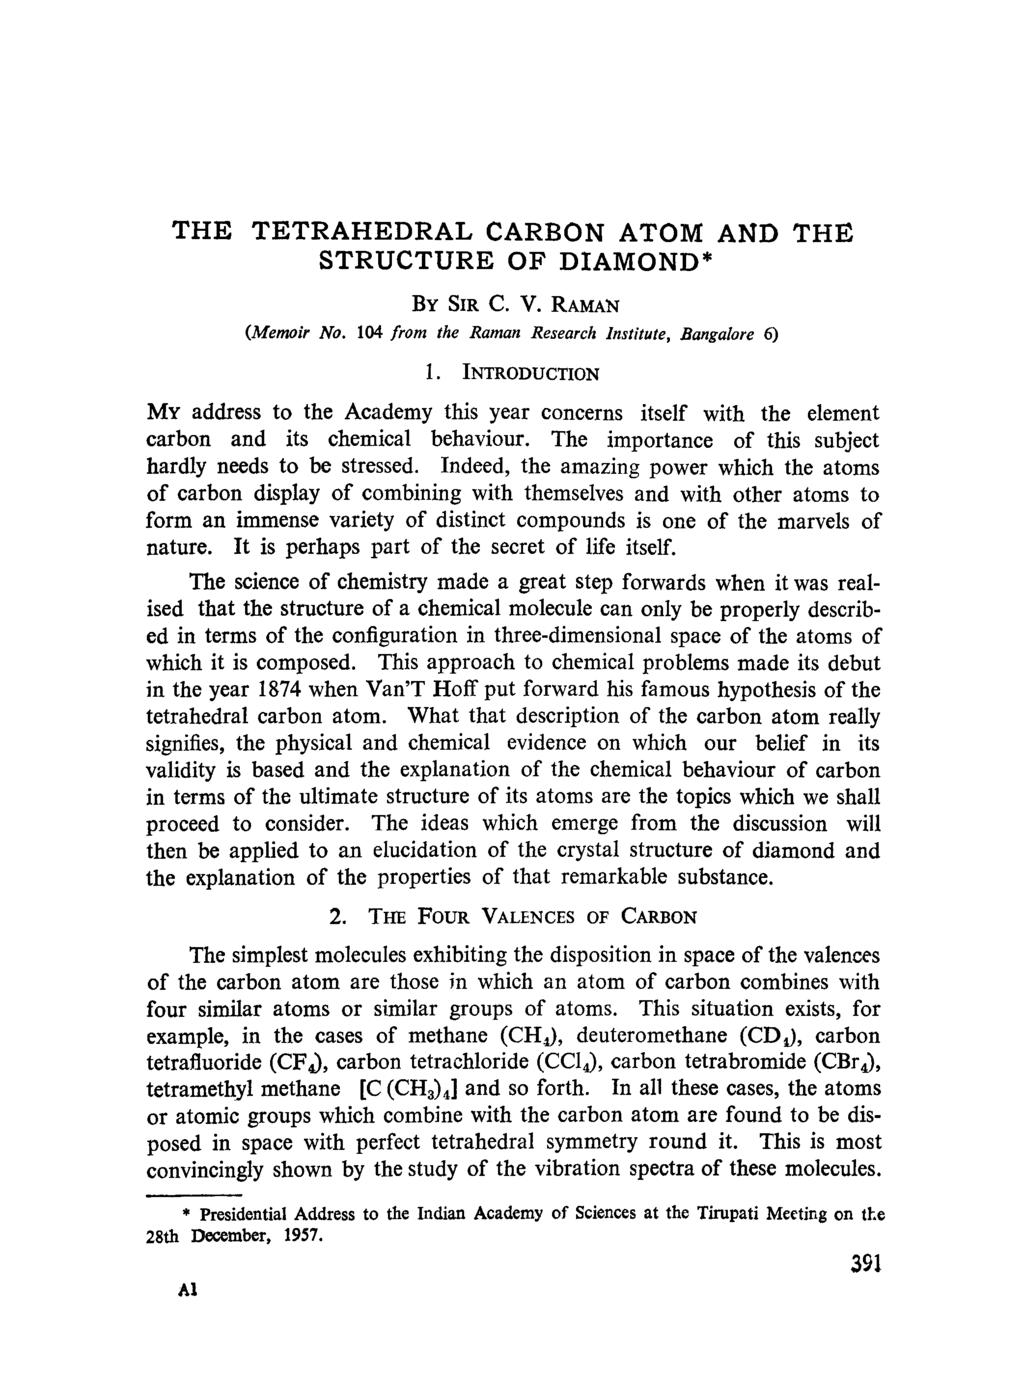 THE TETRAHEDRAL CARBON ATOM AND THE STRUCTURE OF DIAMOND* BY SIR C. V. RAMAN (Memoir No. 104 from the Raman Research Institute, Bangalore 6) 1.